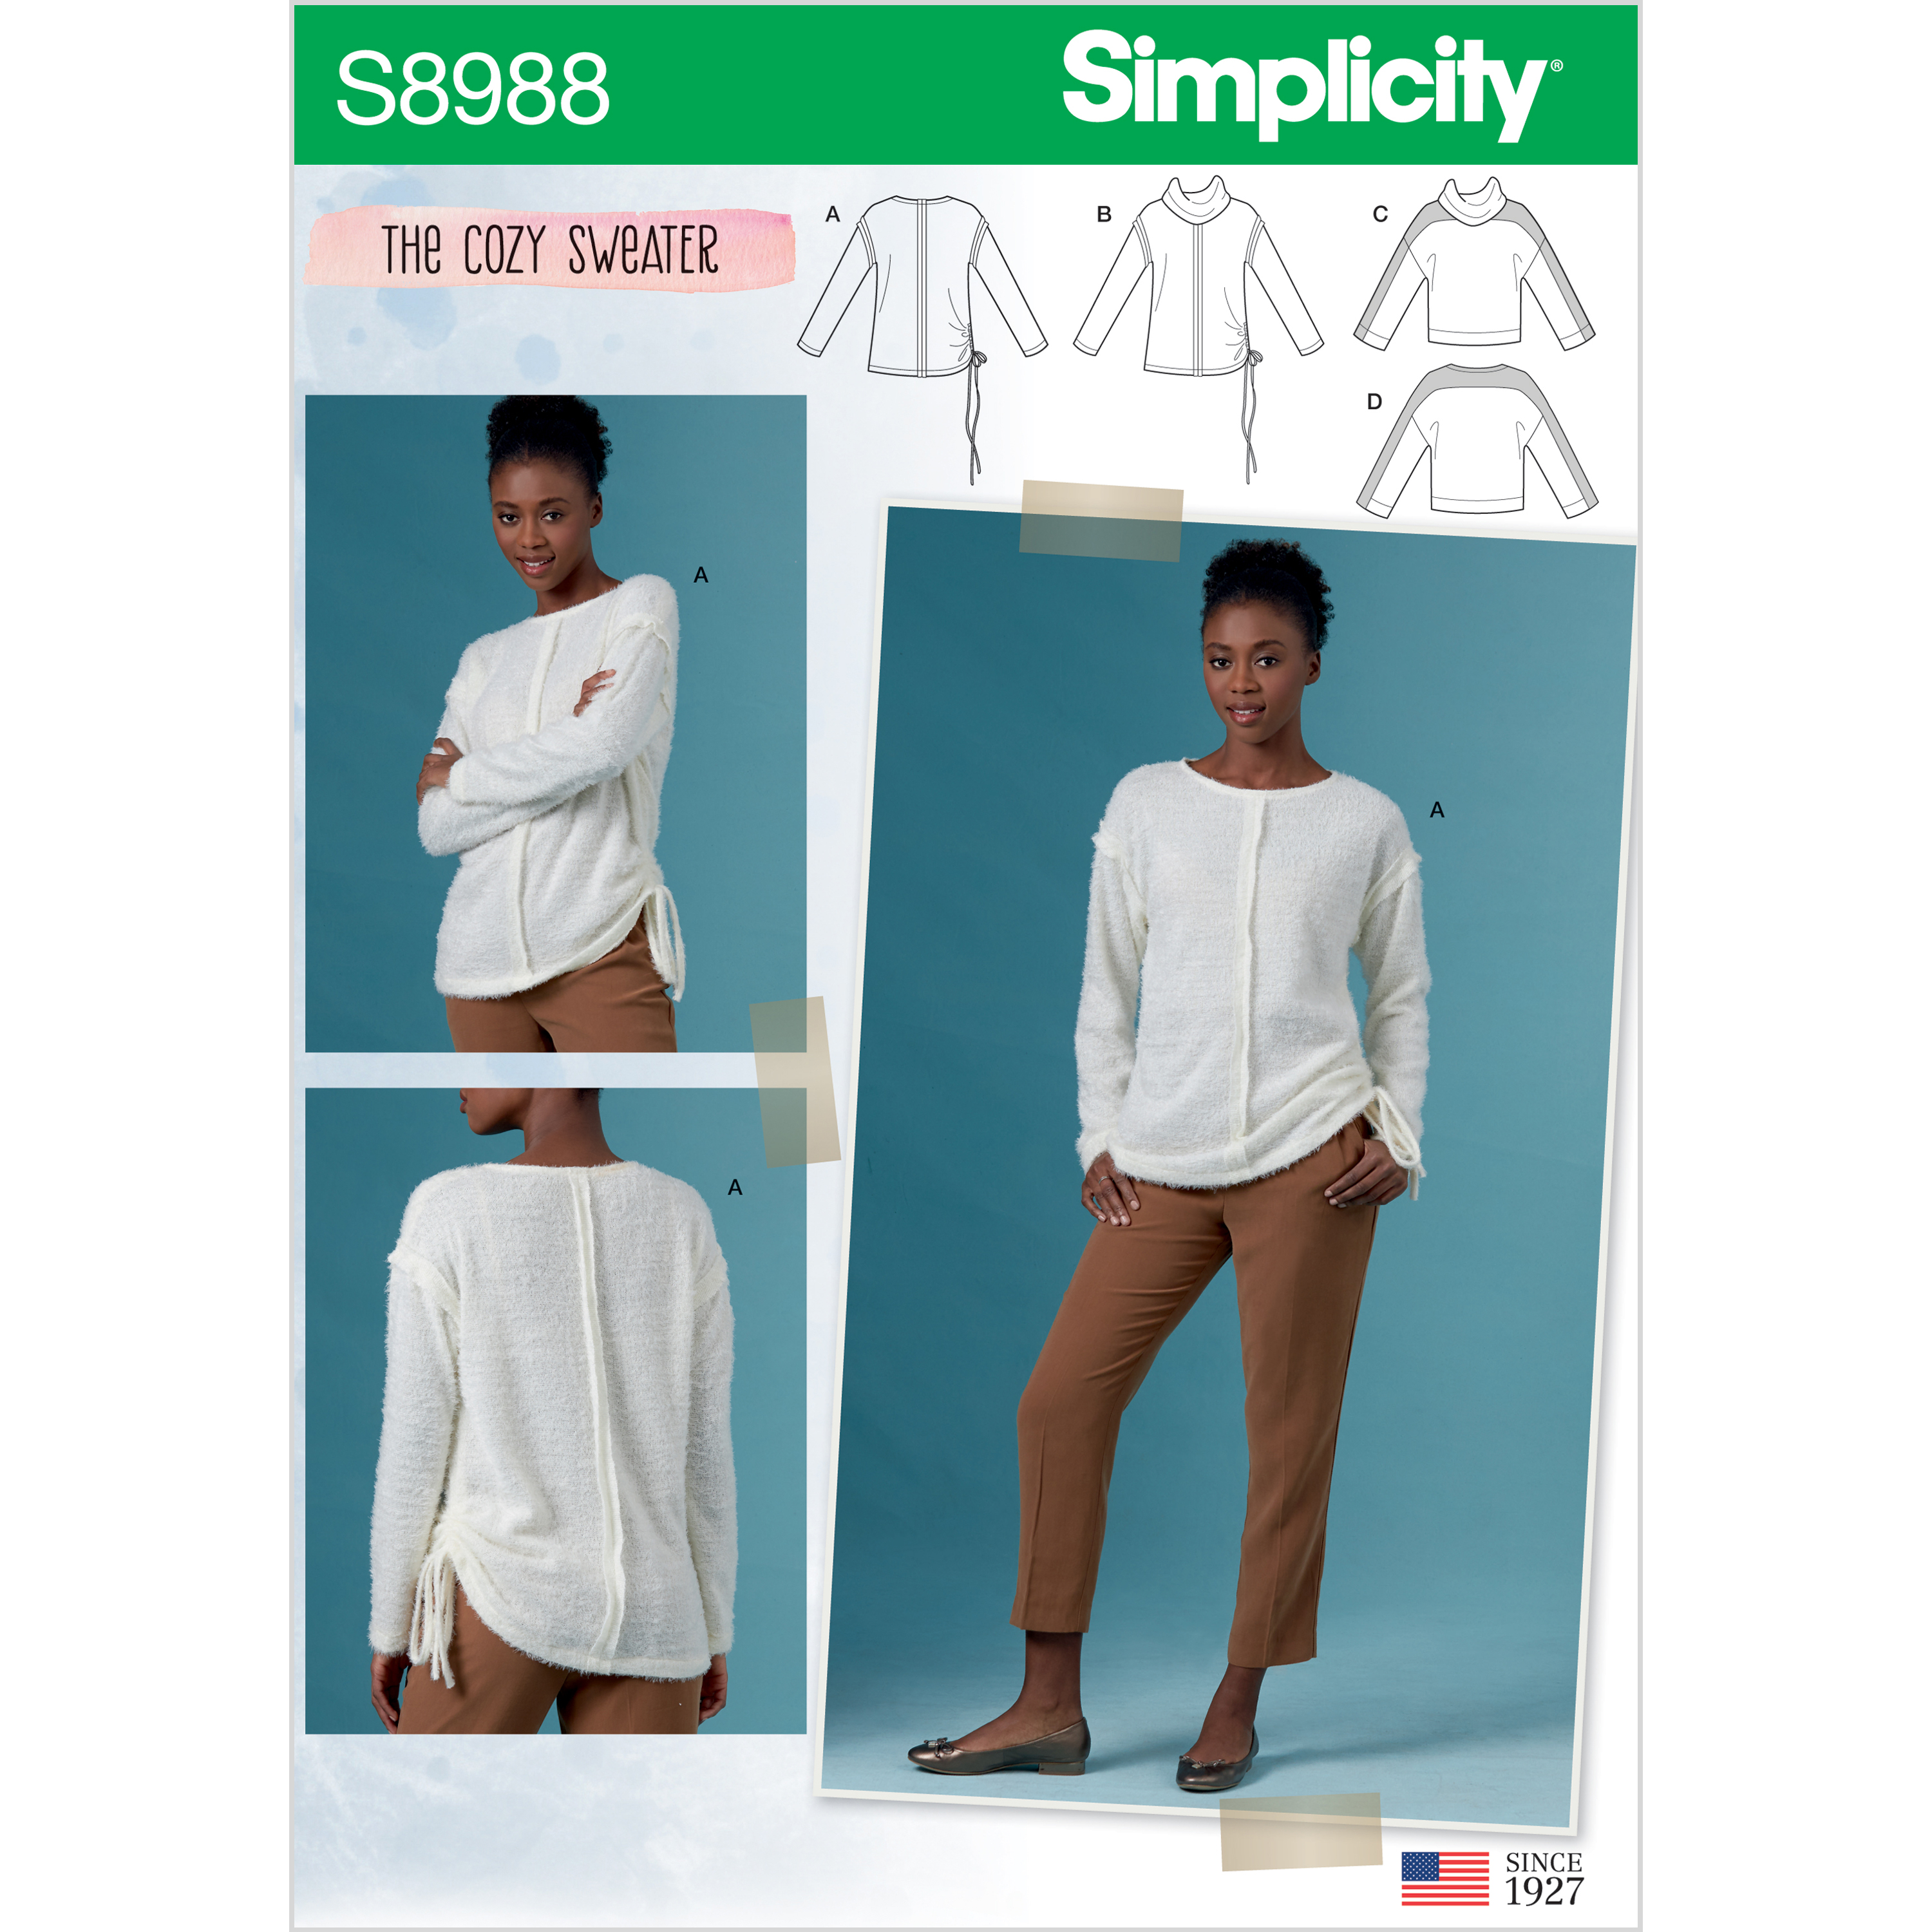 https://images.patternreview.com/sewing/patterns/simplicity/2019/8988/8988.jpg